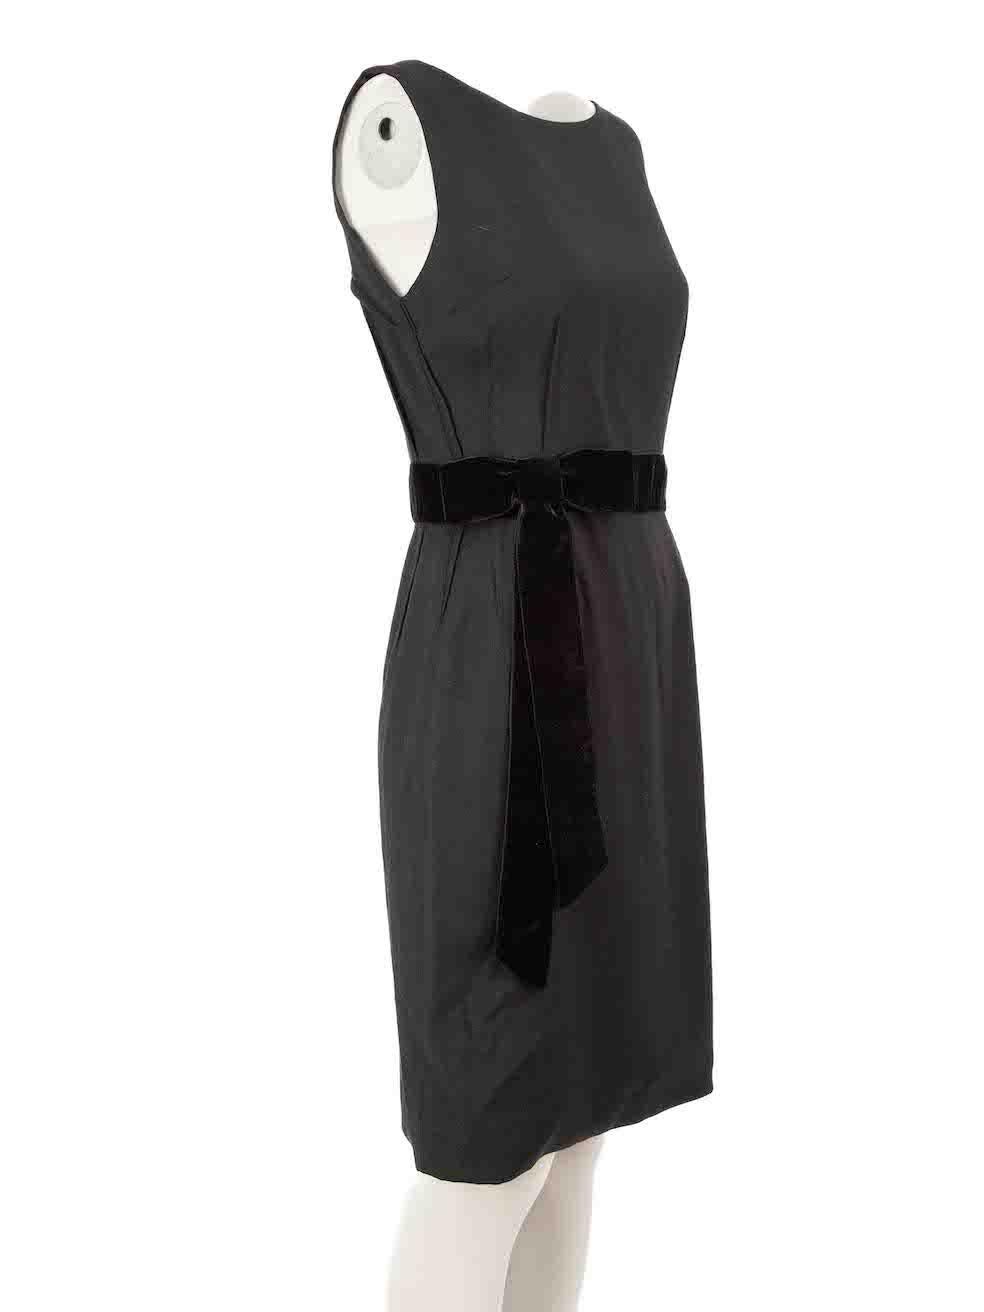 CONDITION is Very good. Hardly any visible wear to dress is evident. Brand label is partially detached on this used Dolce & Gabbana designer resale item.
 
 Details
 Black
 Wool
 Dress
 Sleeveless
 Round neck
 Knee length
 Velvet bow detail
 Back